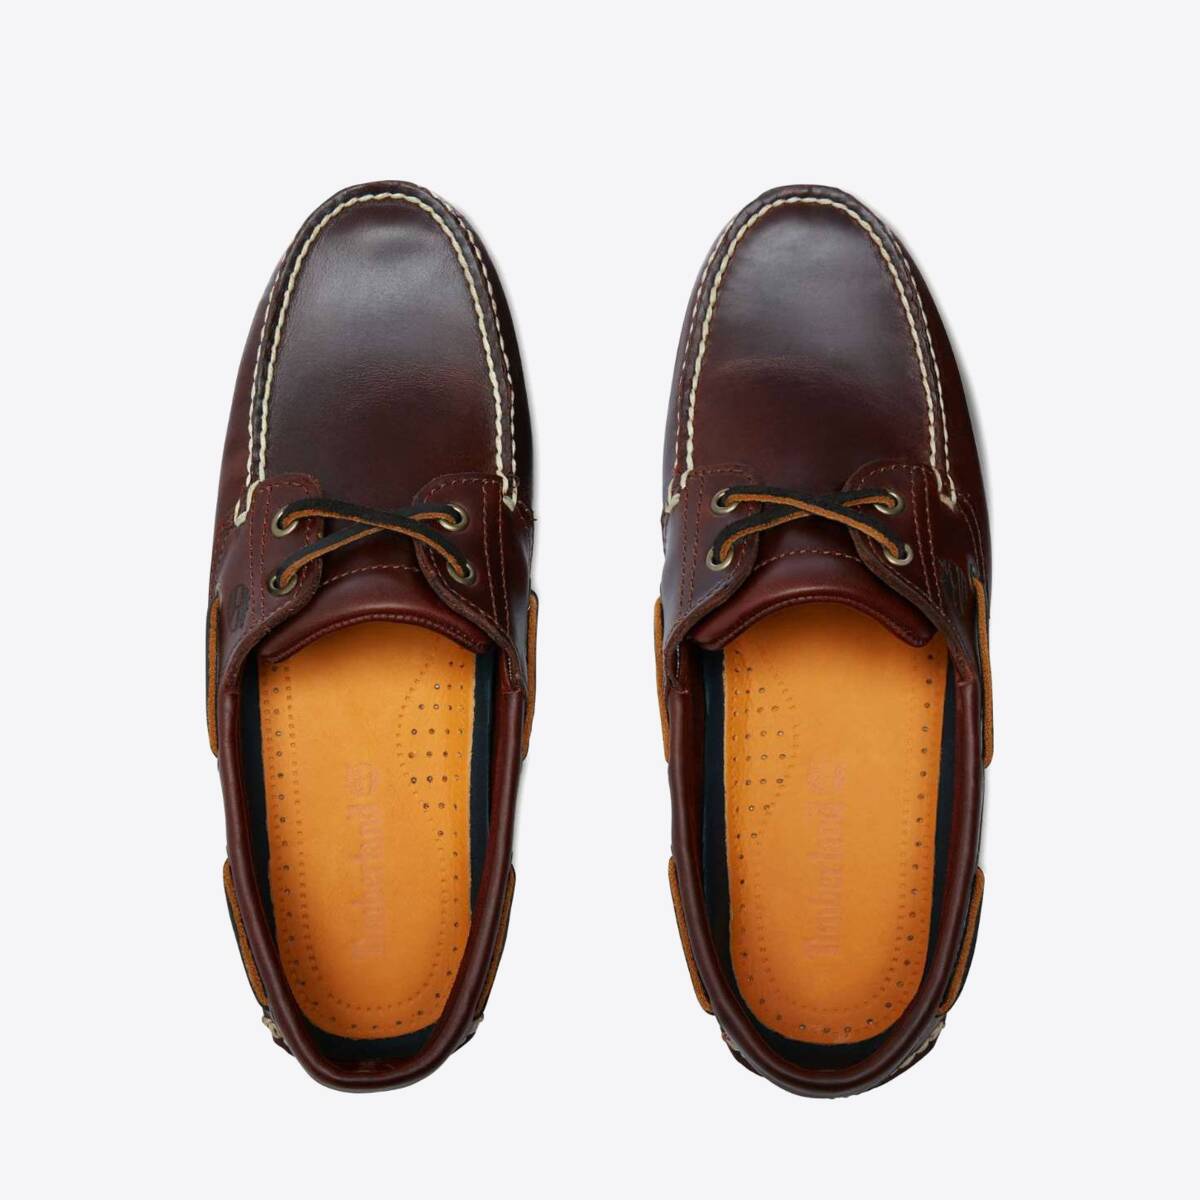 TIMBERLAND Classic 2-Eye Boat Shoes Rootbeer - Image 7